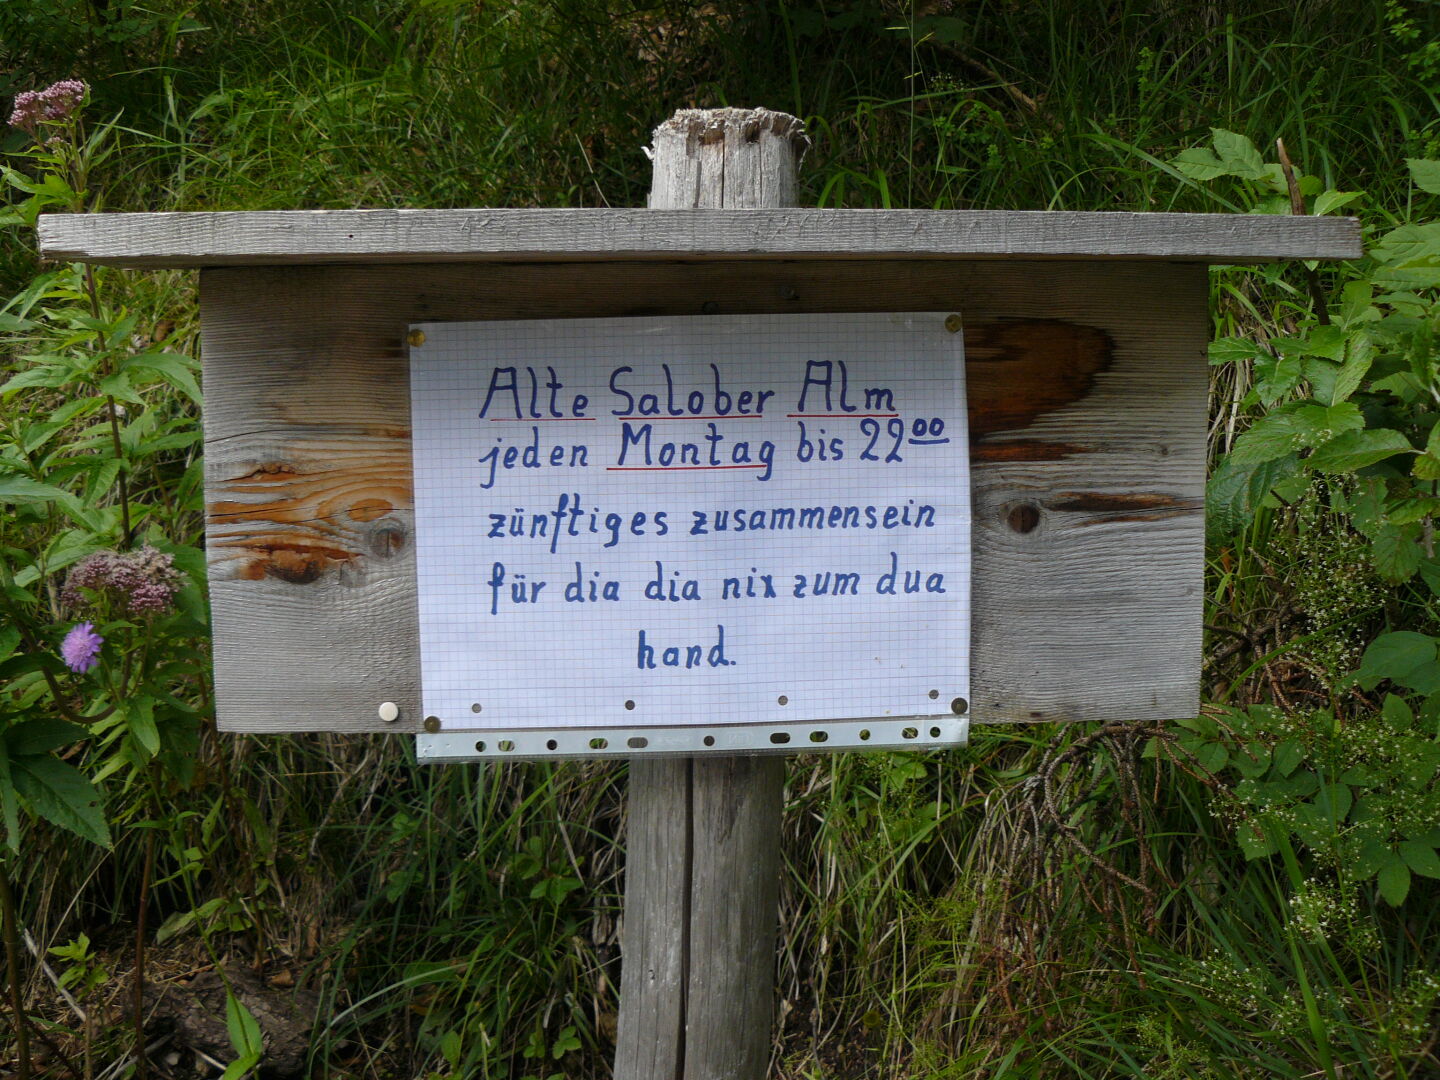 The sign reads &quot;Old Salober Alp (=name of the hut), every Monday until 10 p.m. traditional get-together for people who have nothing to do&quot;, written in Bavarian dialect.